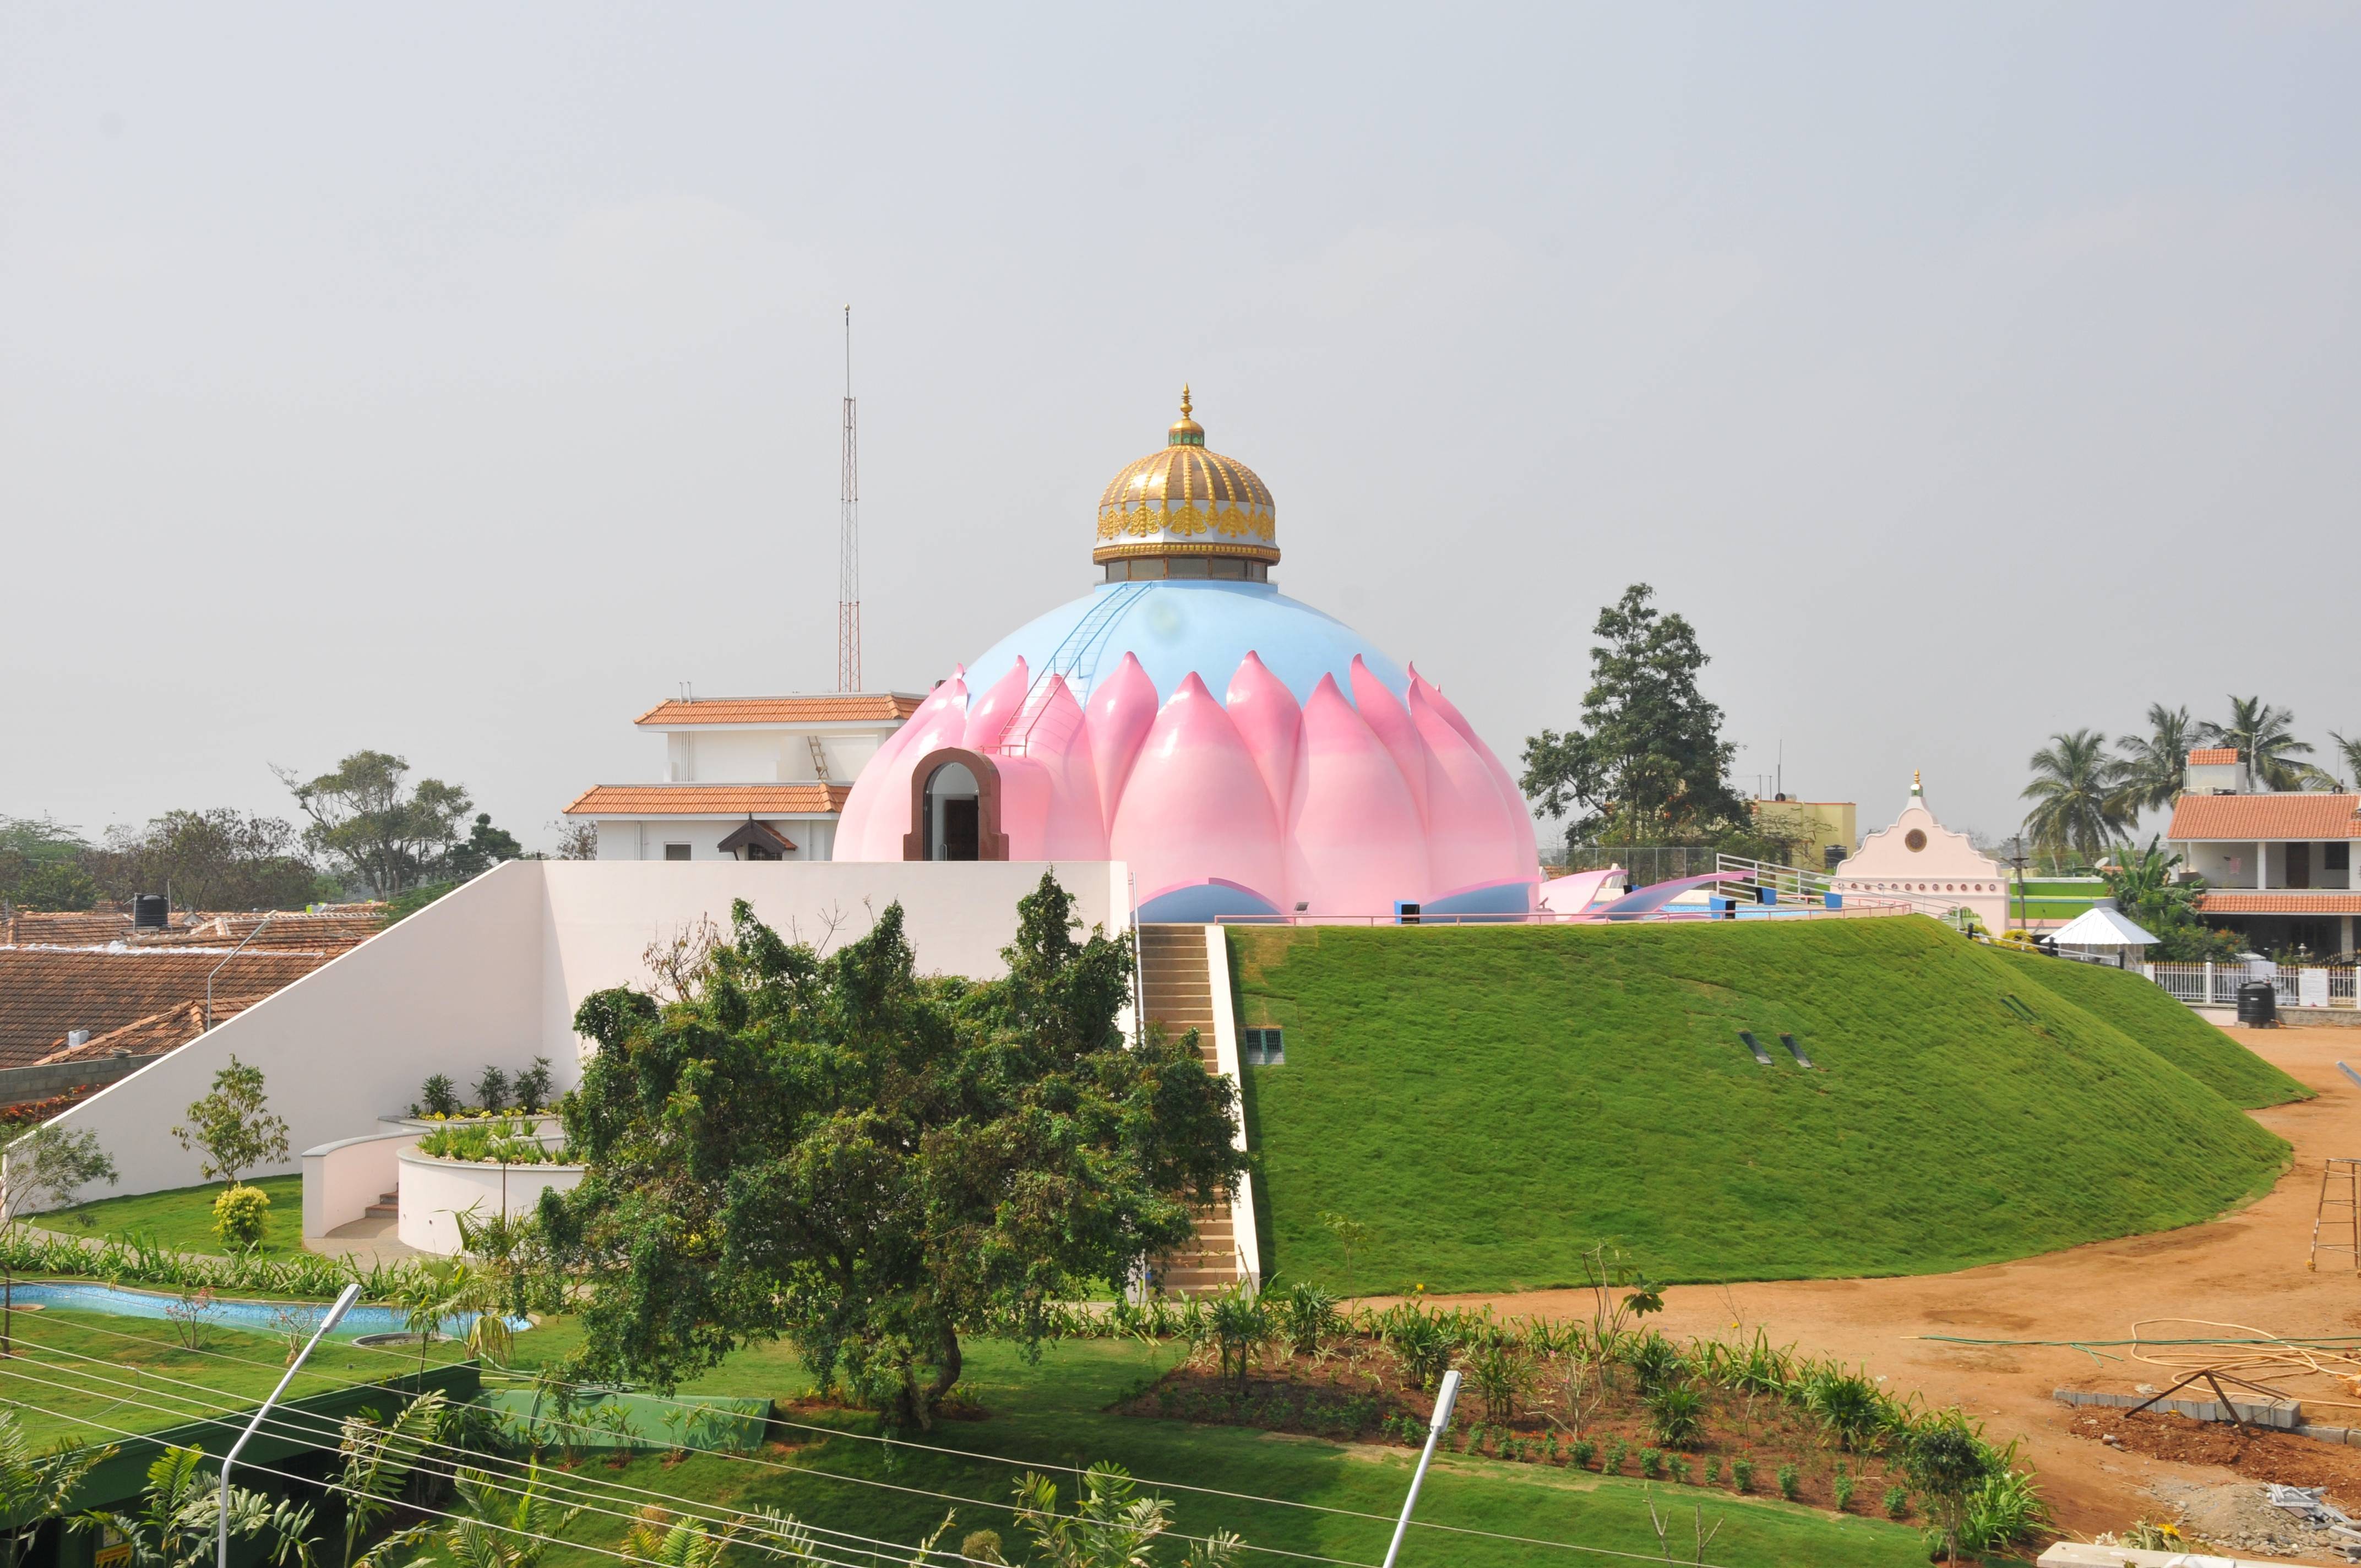 Lotus Temple Photos, Chettipalayam, Coimbatore- Pictures & Images ...